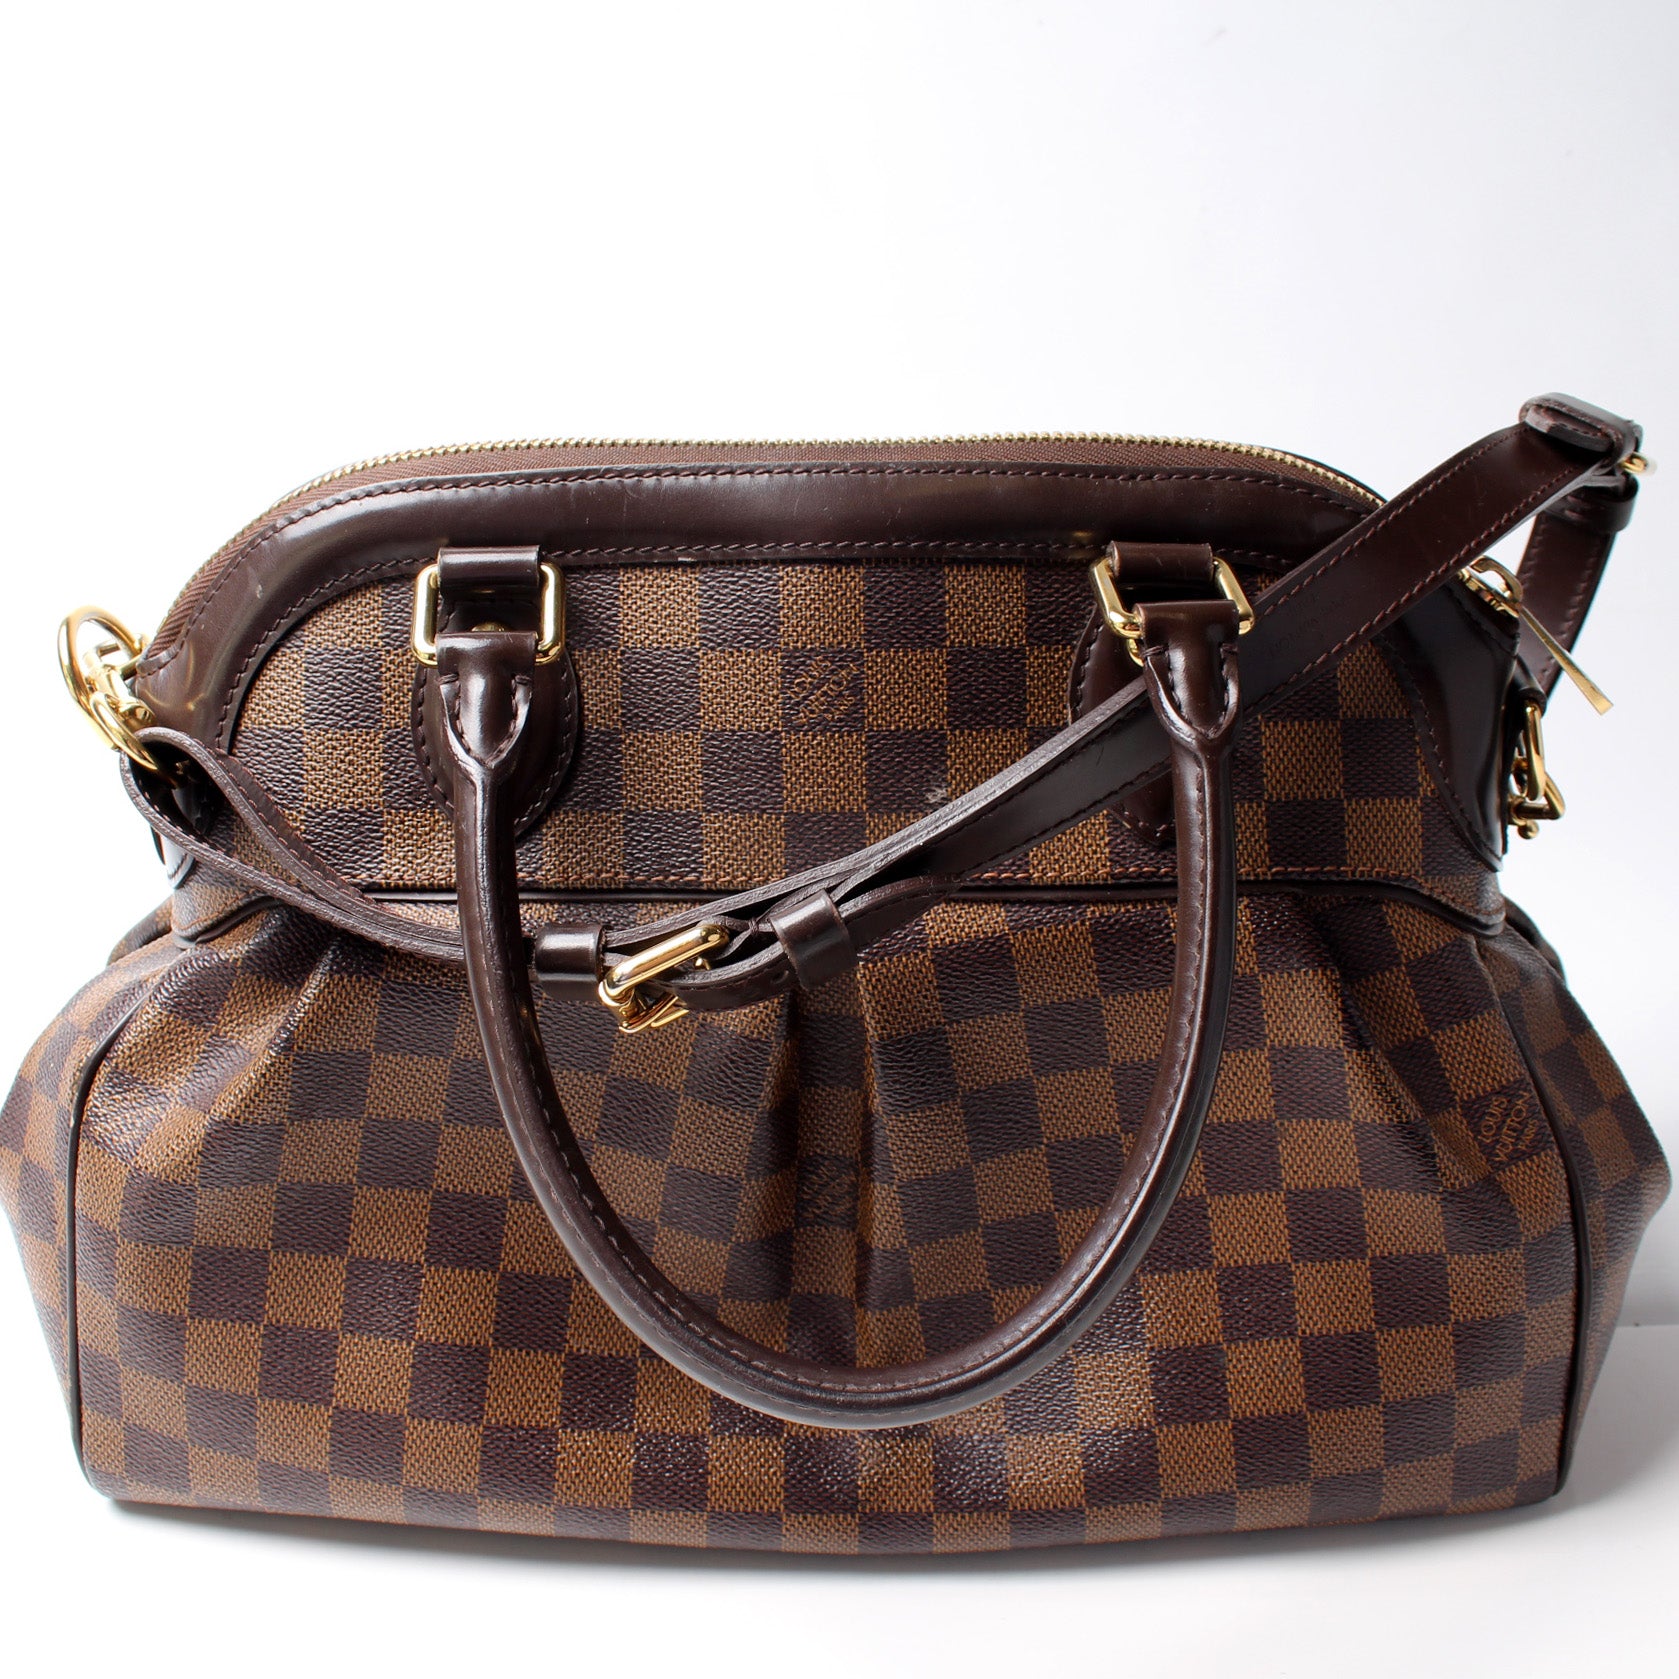 DISCOUNT FROM FRANCE LOUIS VUITTON TREVI PM BAG N51997